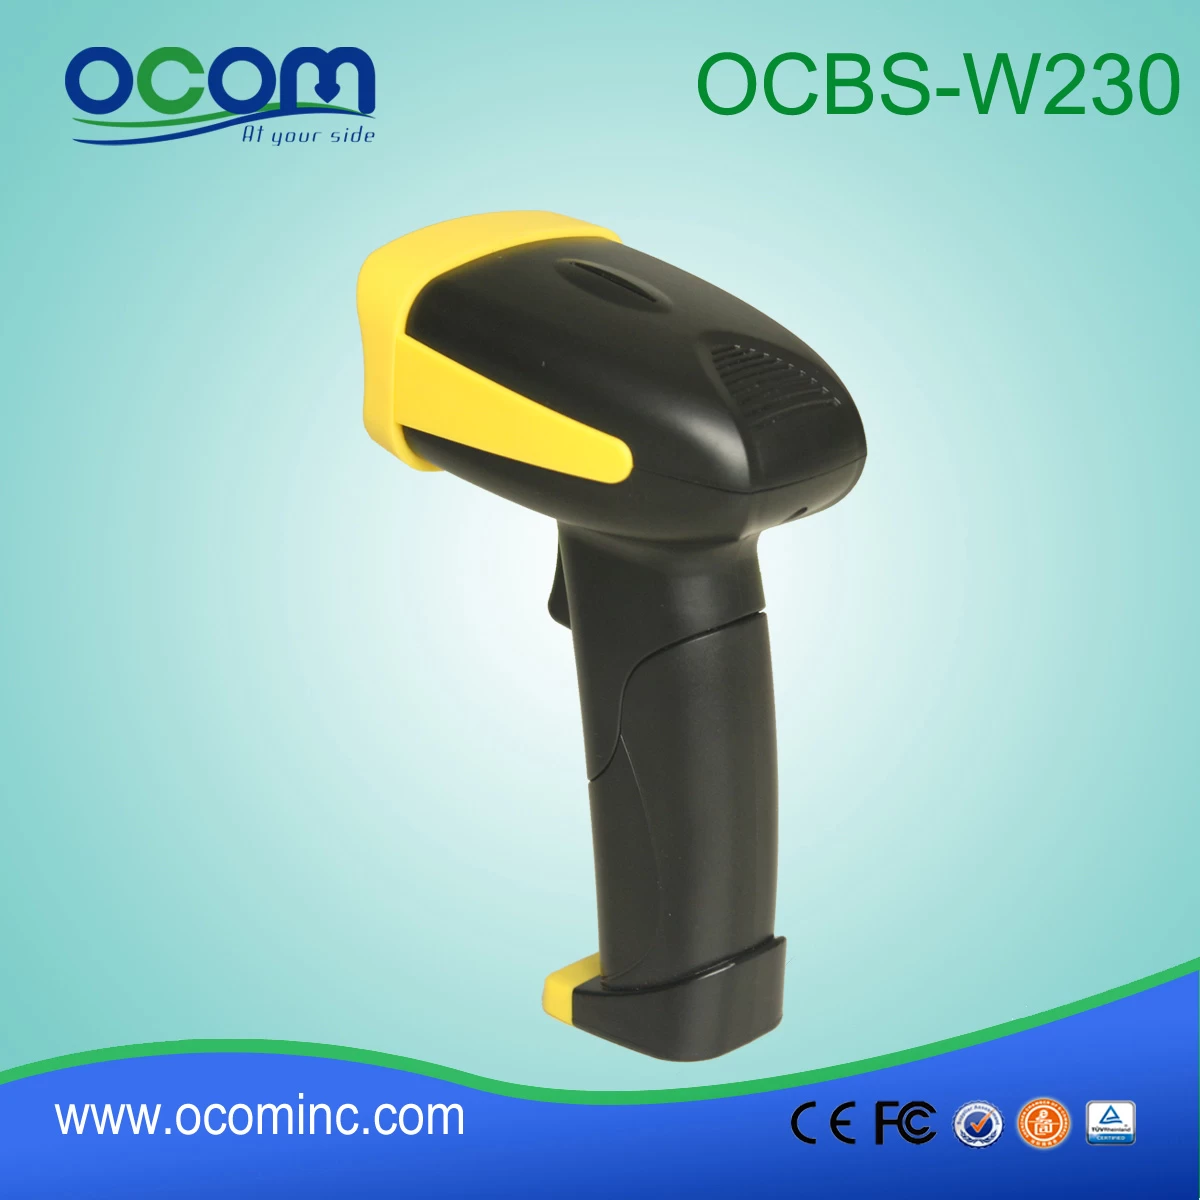 2d barcode reader bluetooth, android mobile barcode scanner